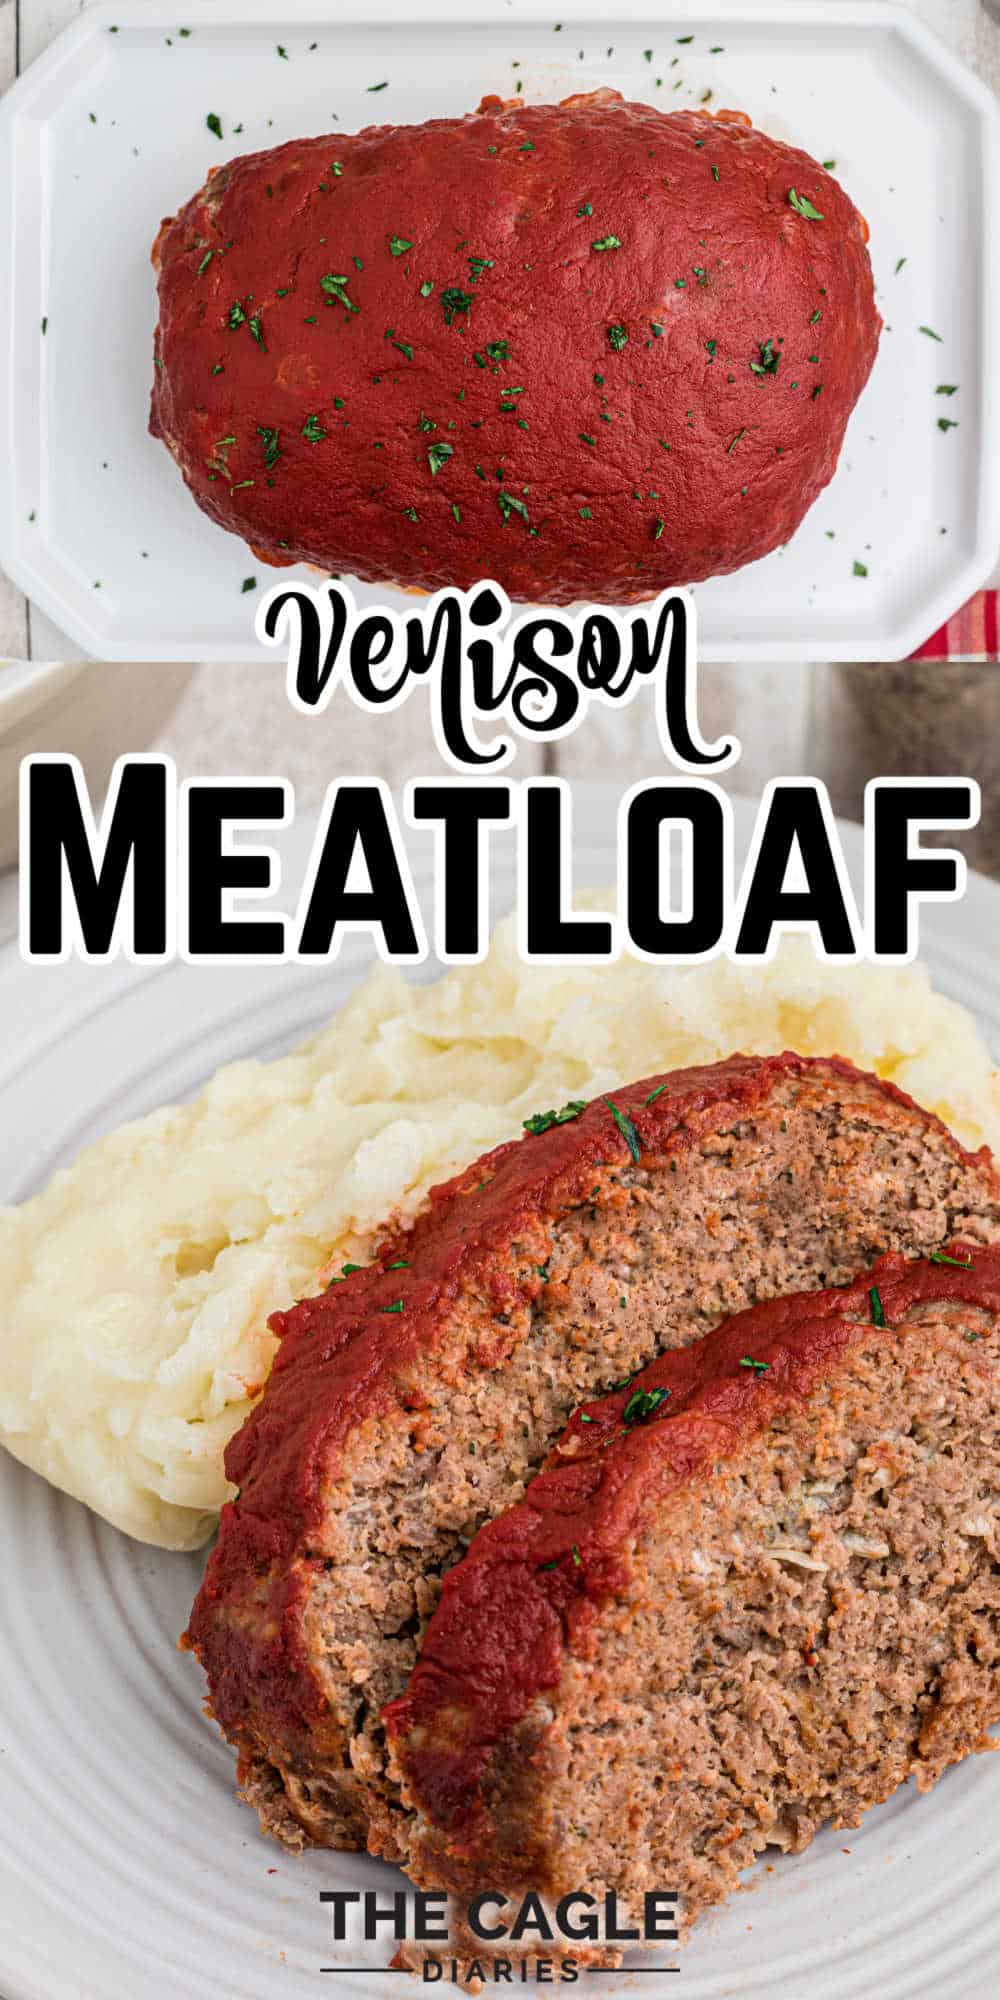 Venison Meatloaf Recipe | The Cagle Diaries